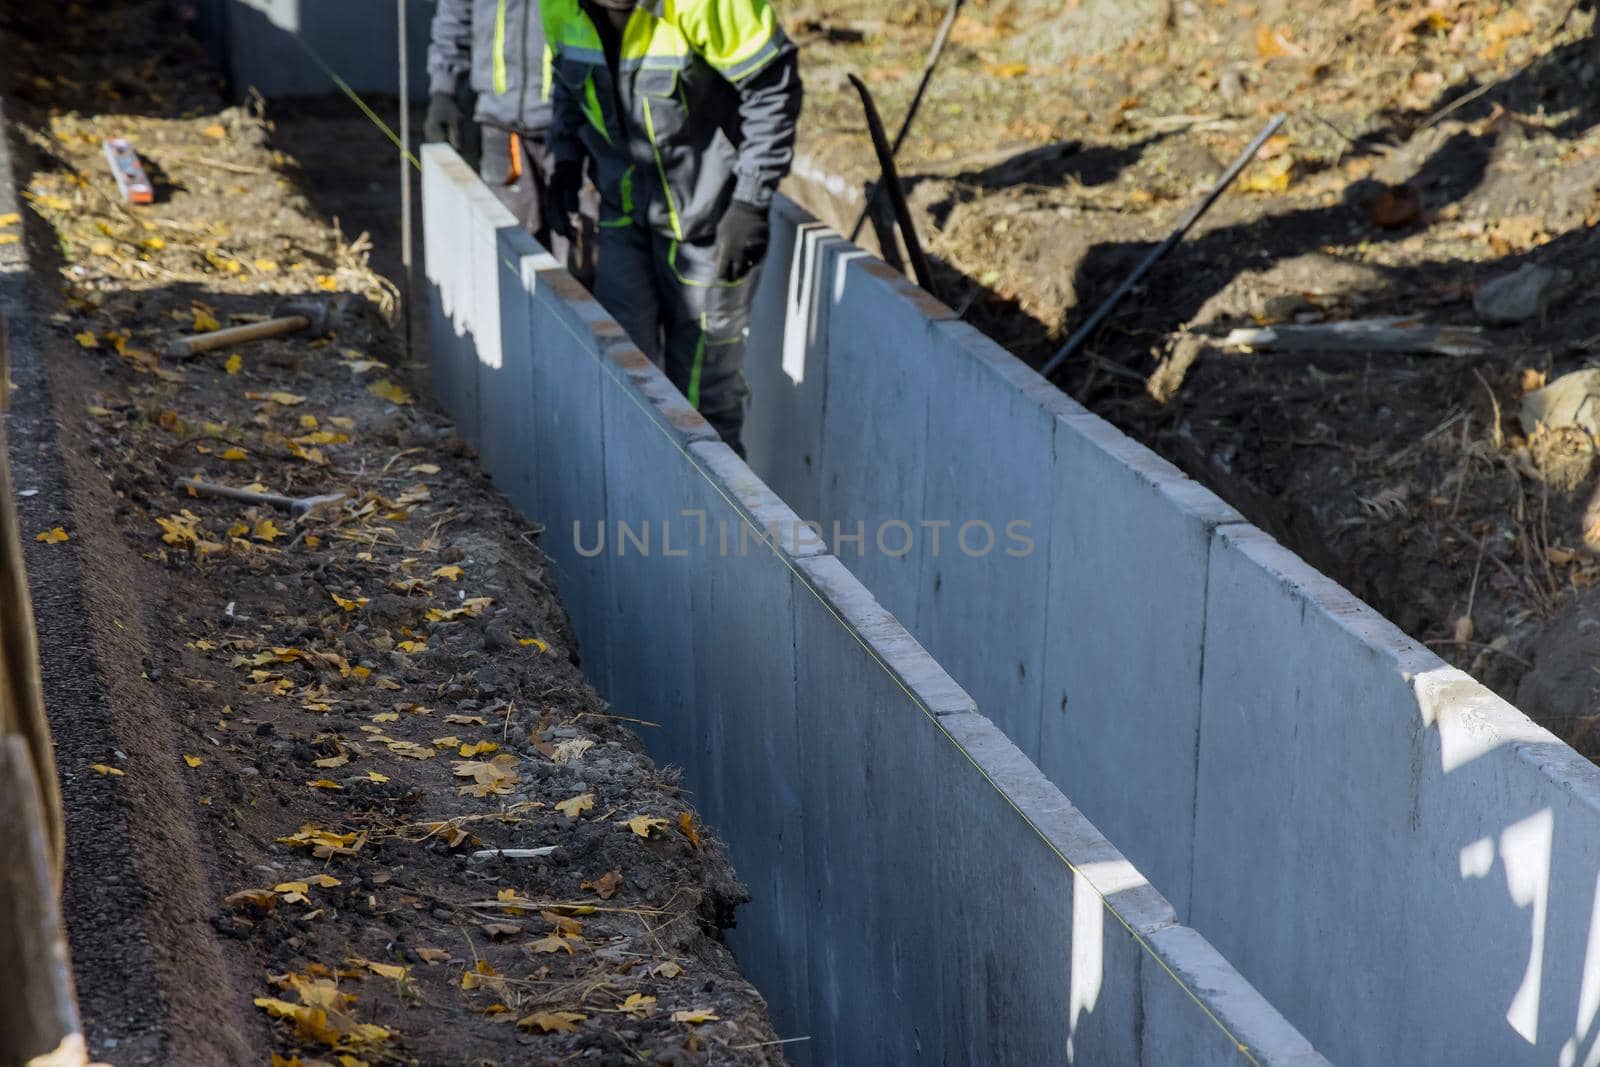 Construction workers installing precast u-shape concrete drain at the reconstruction road by ungvar